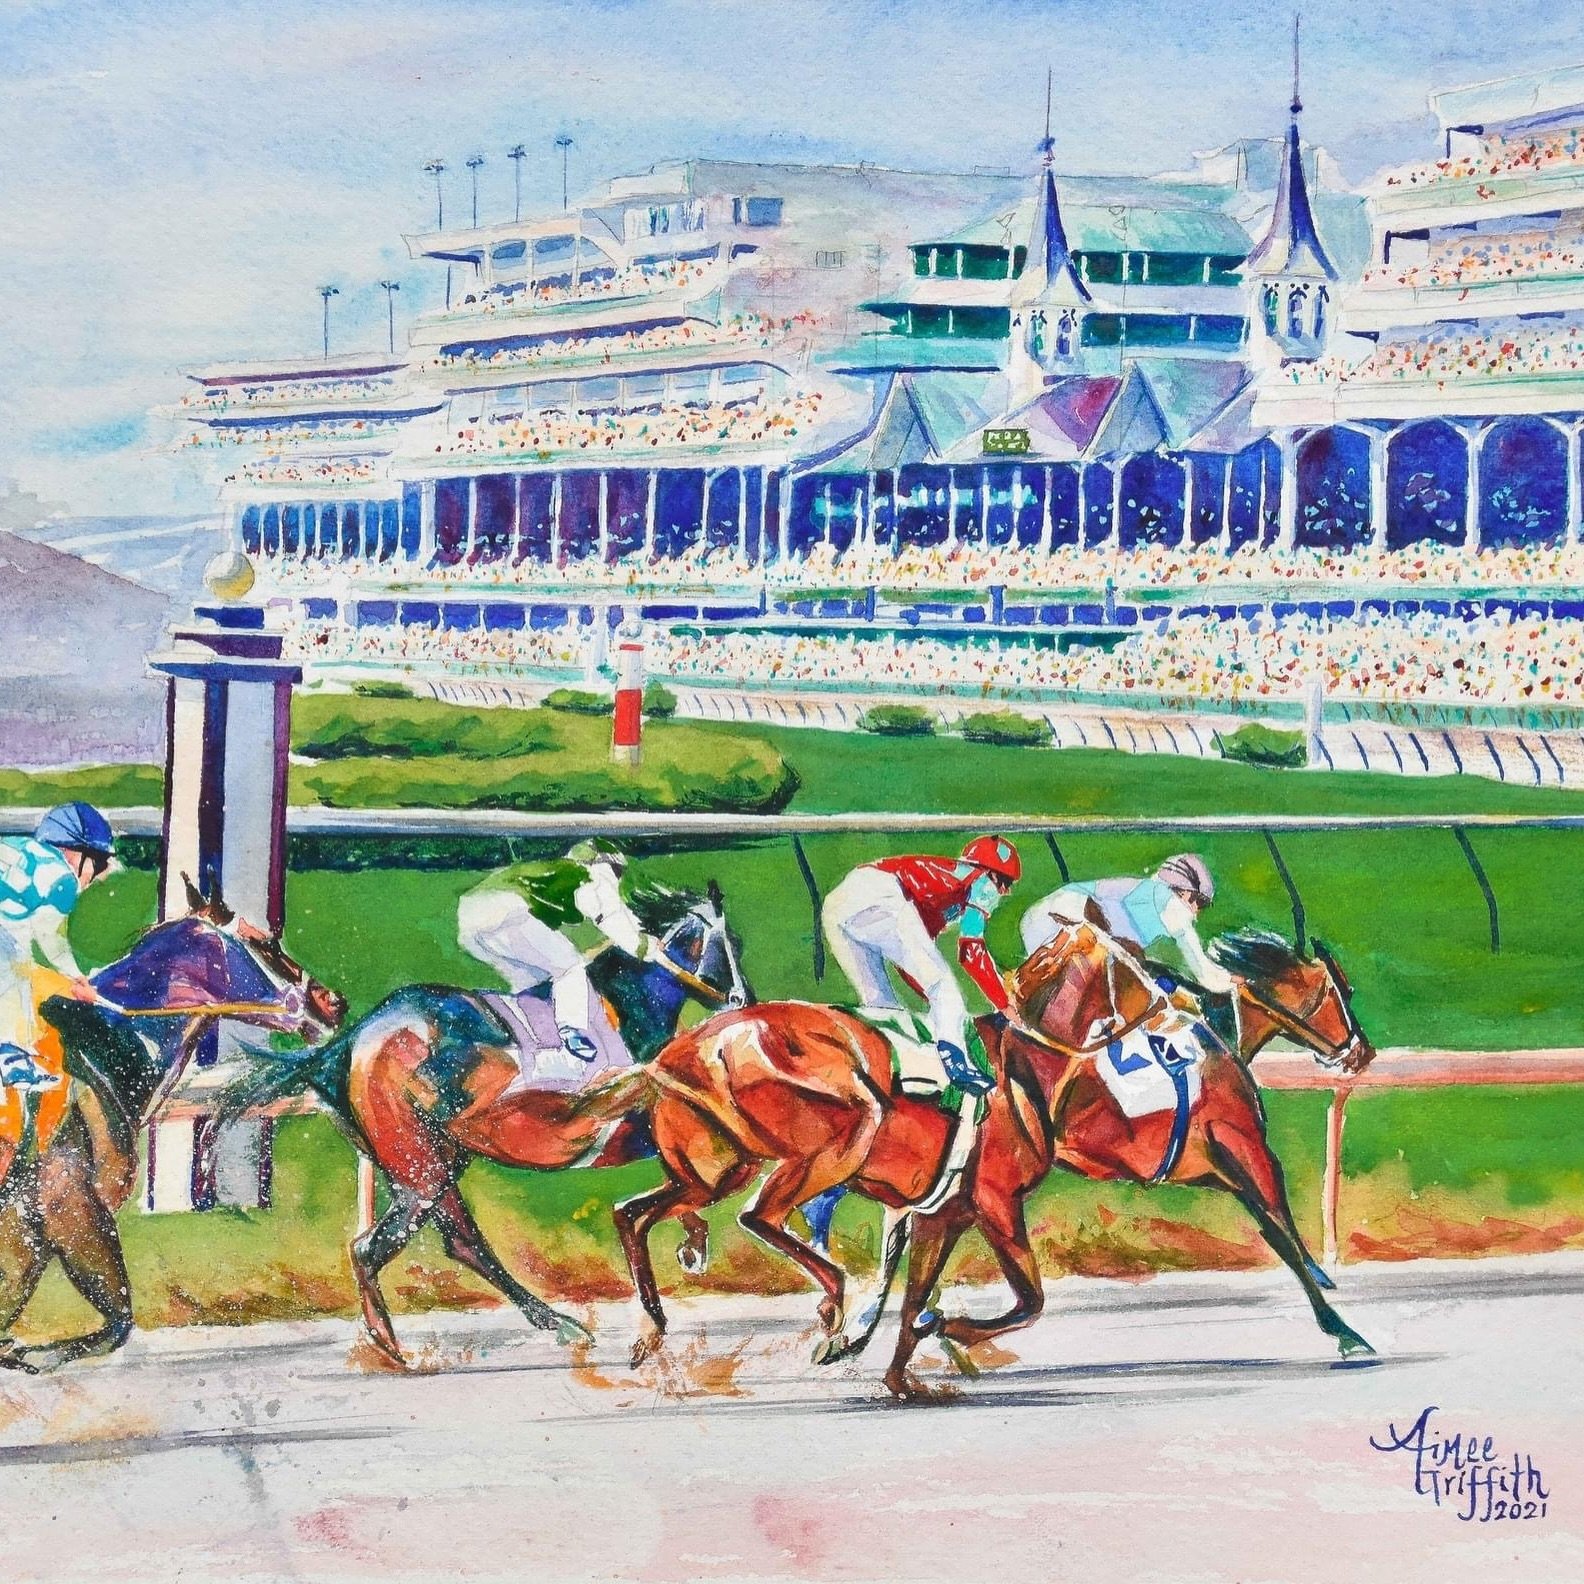 Fellow Kentuckians - Have you heard of Alan Rhody or this song? I stumbled across it on Instagram and fell in love but I can&rsquo;t find it anywhere. Here are the beautiful lyrics set to one of my favorite @kentuckyderby prints, available on my webs